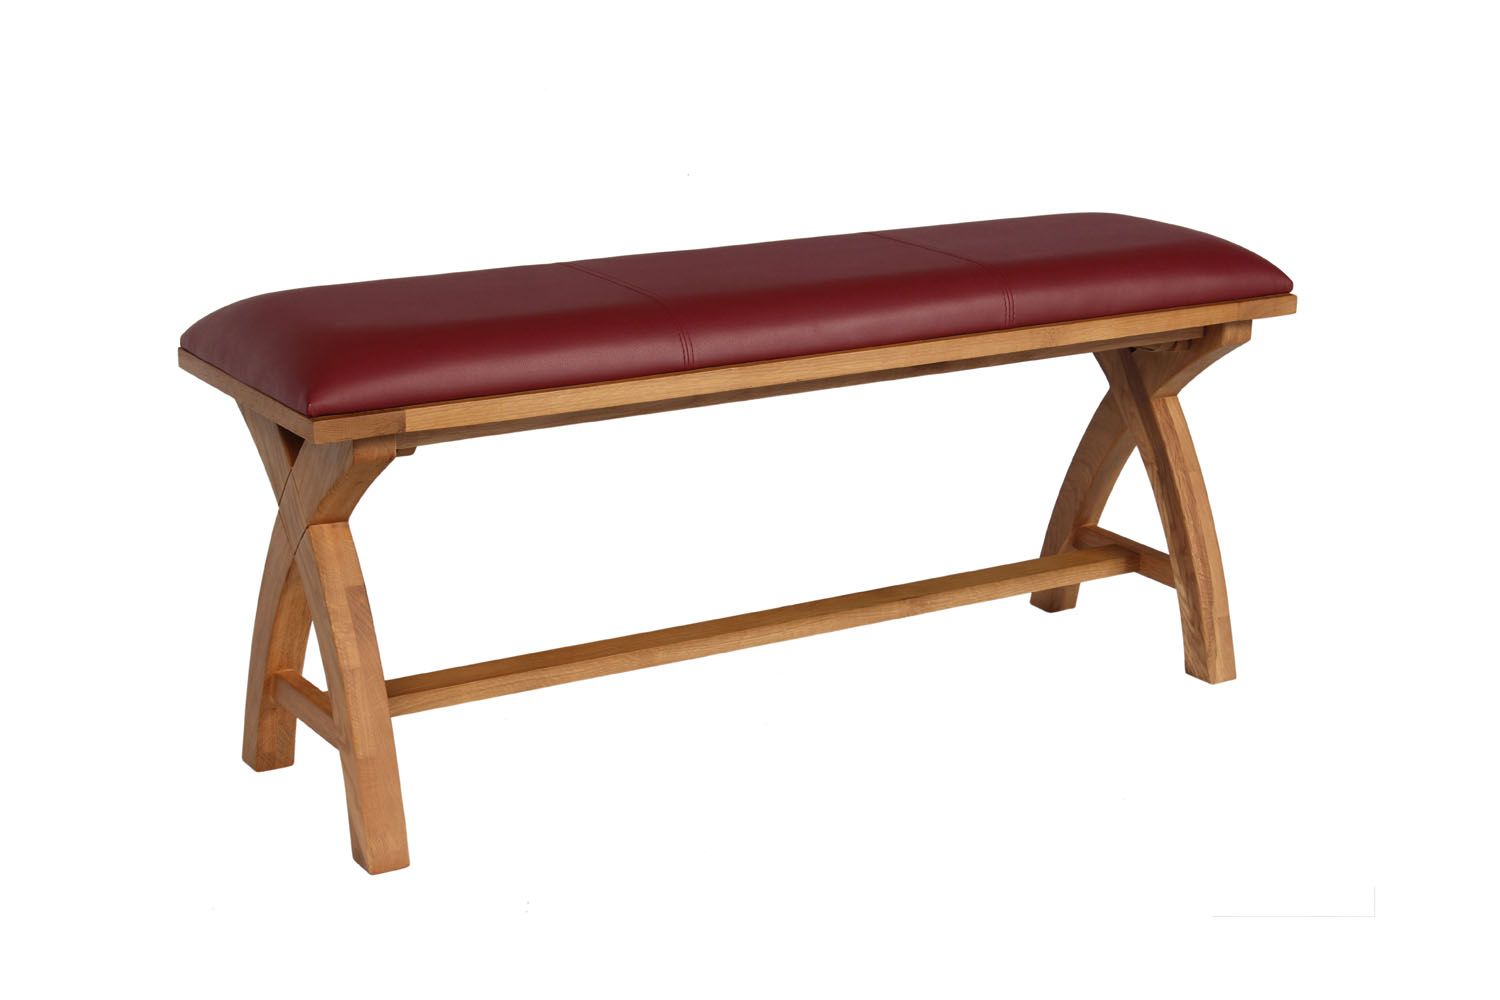 Red Leather Dining Bench 120cm Cross Leg Country Oak Design - 10% OFF WINTER SALE